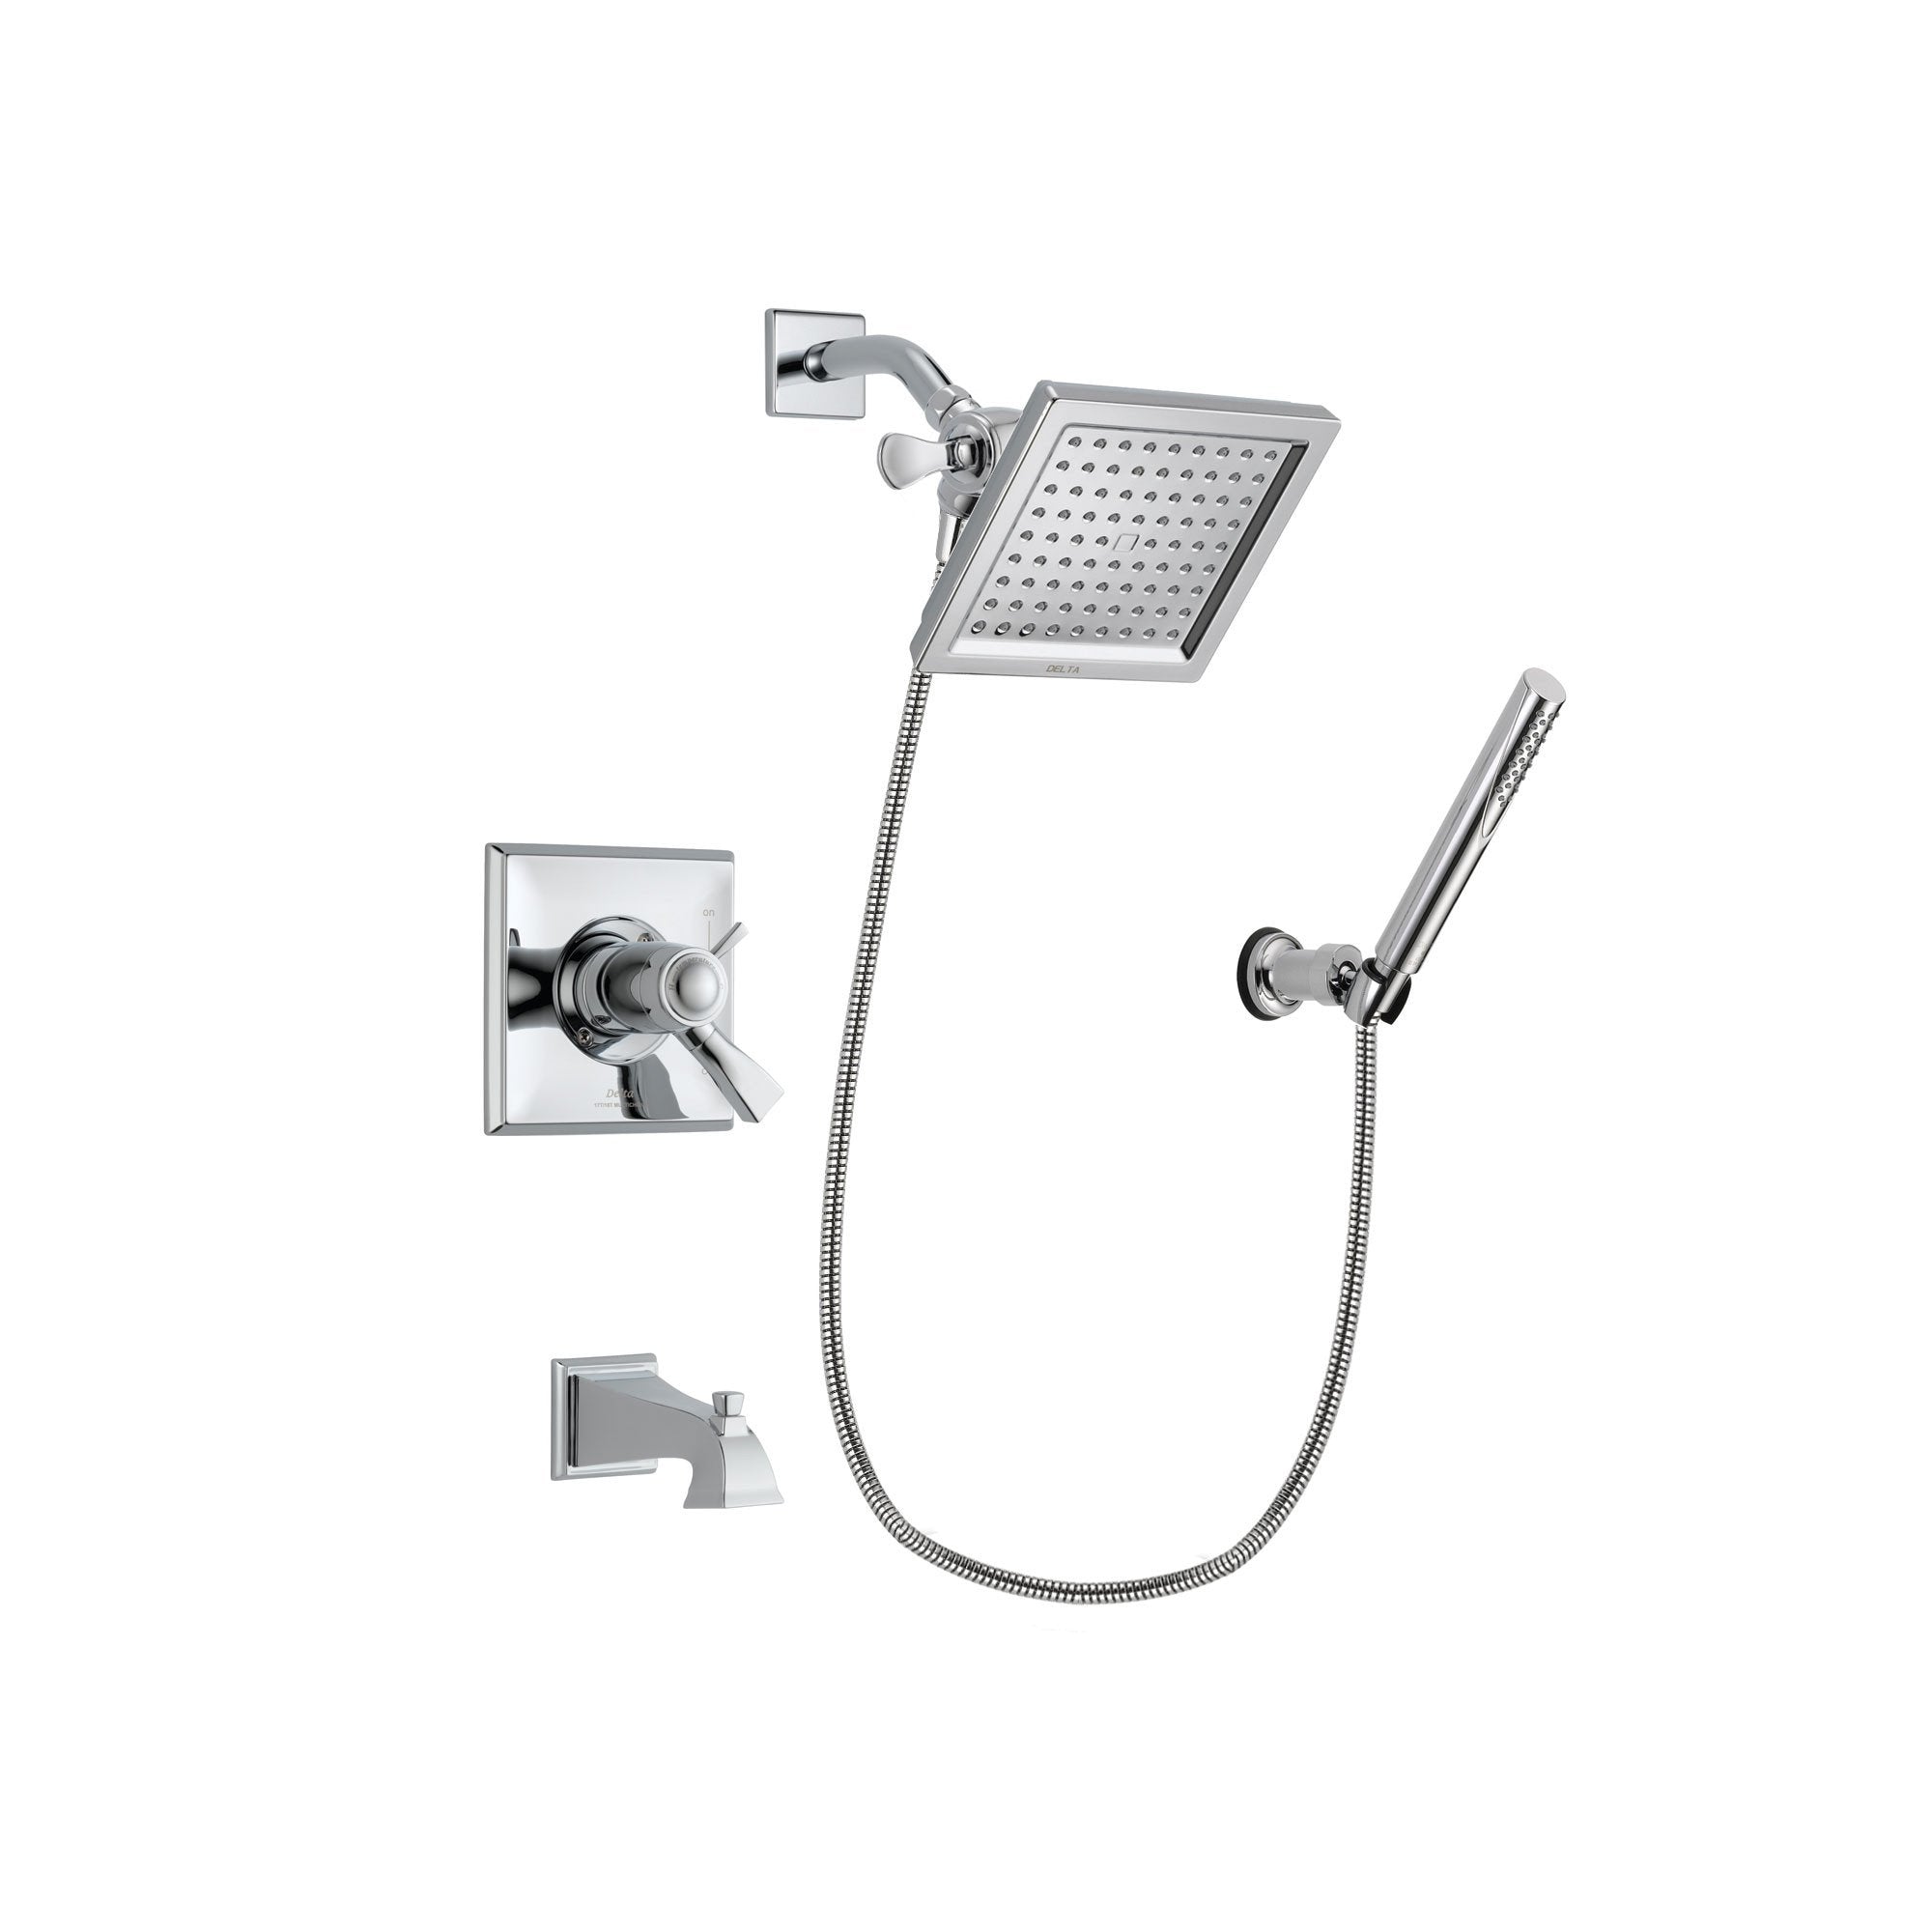 Delta Dryden Chrome Finish Thermostatic Tub and Shower Faucet System Package with 6.5-inch Square Rain Showerhead and Modern Handheld Shower Spray with Wall Bracket and Hose Includes Rough-in Valve and Tub Spout DSP0066V